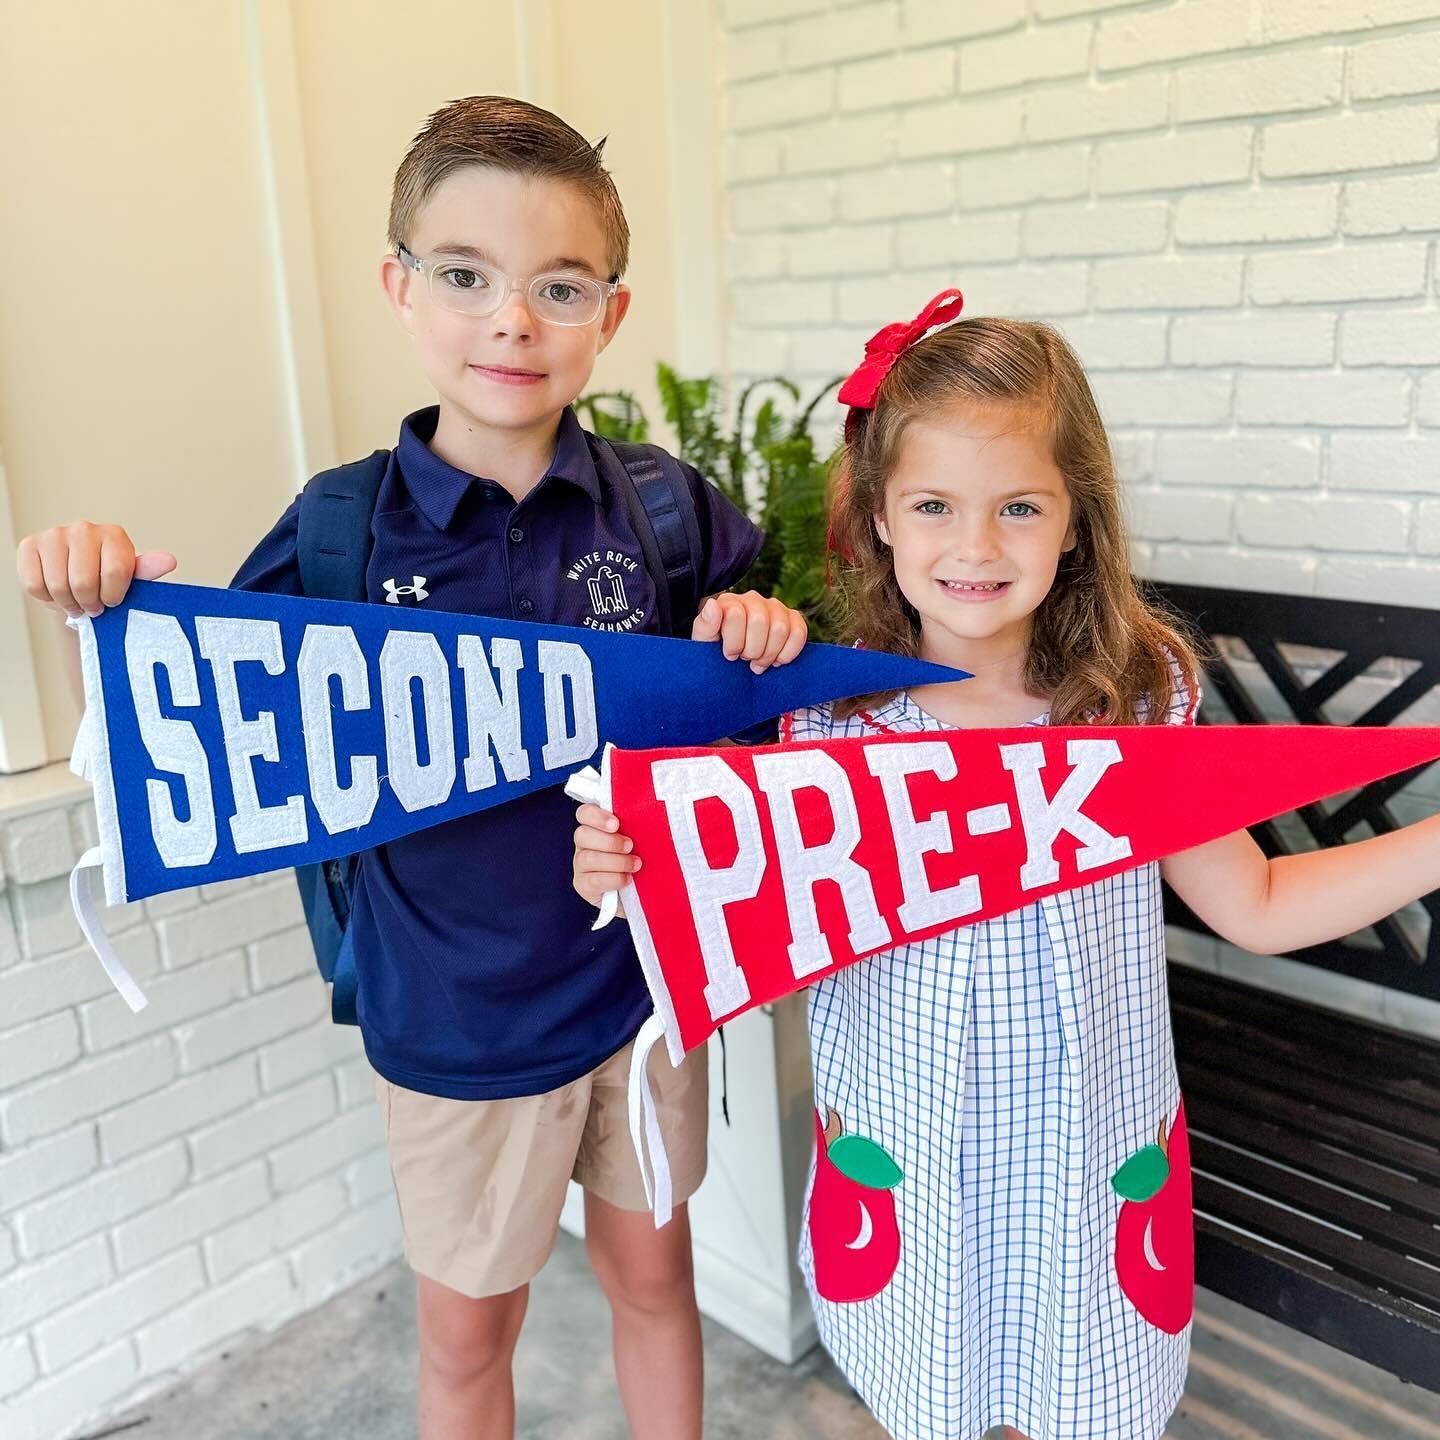 Summer here we come! A fantastic year in second and prek4! Deacon grew so much this year - graduated speech at school, had the sweetest class, and while becoming more mature and independent, still likes being around us (thank goodness!). He was such 